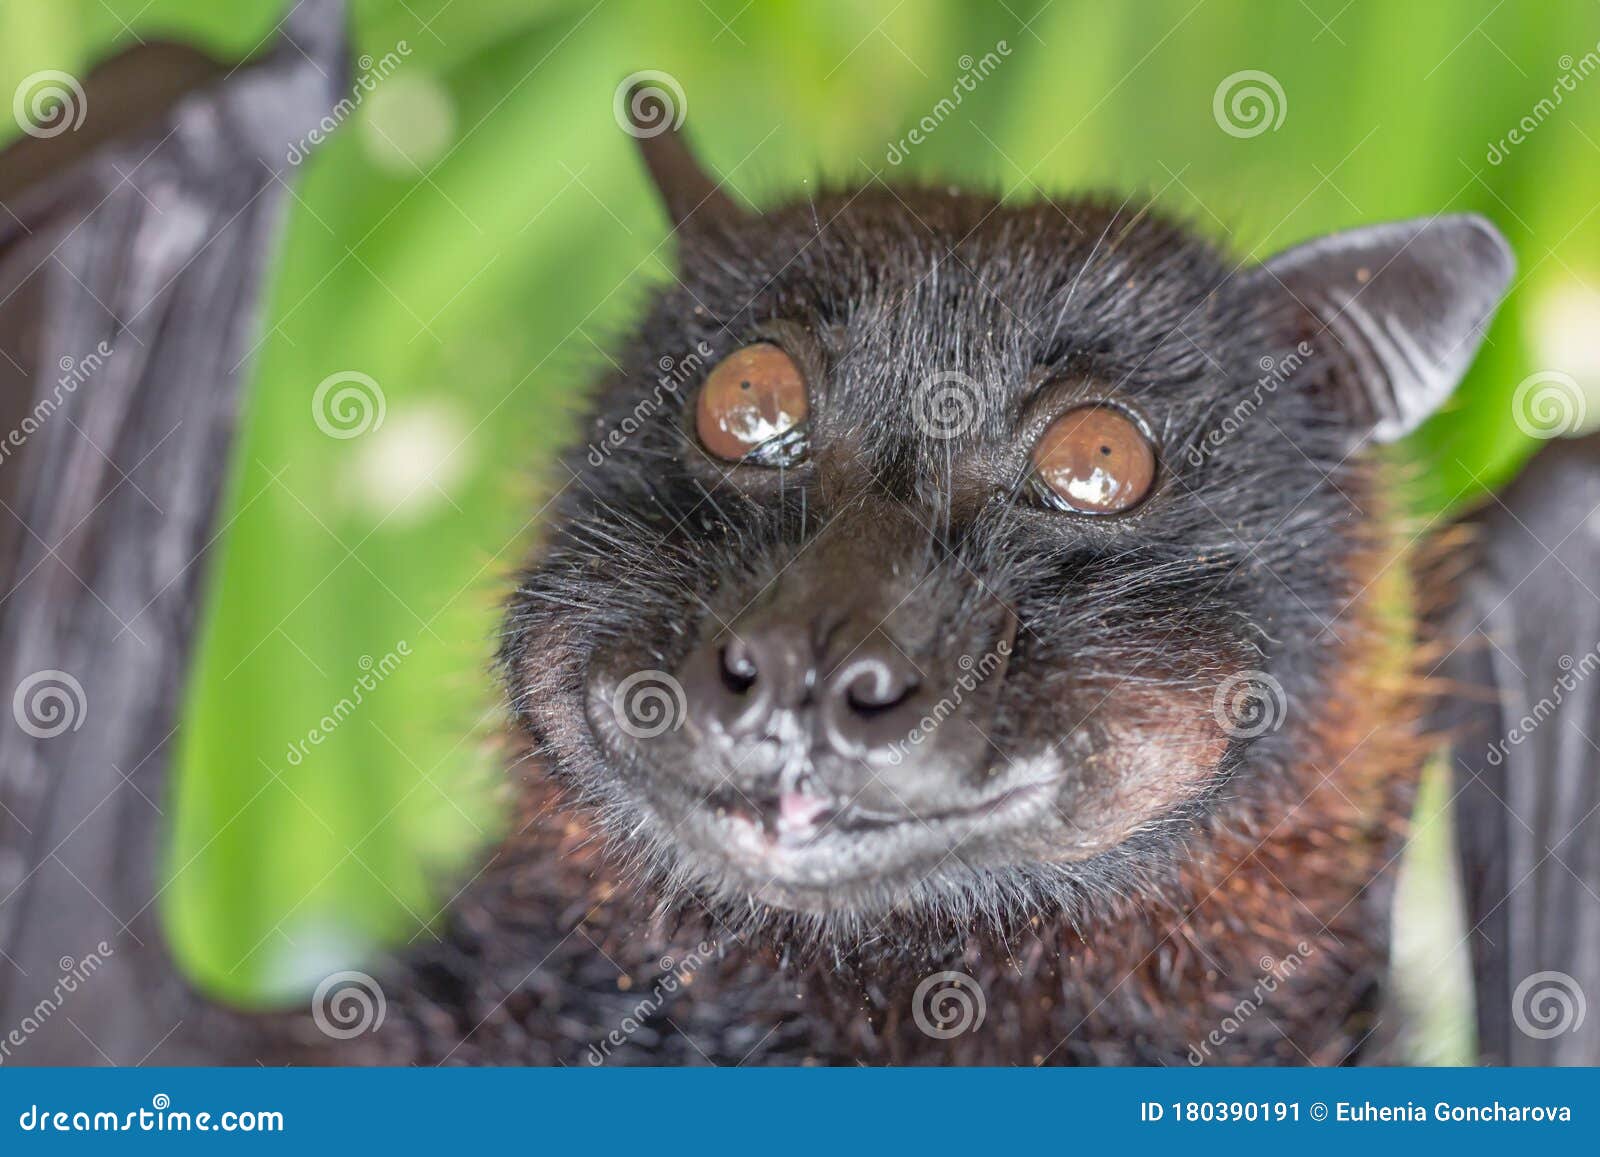 Portrait of Fruit Bat, or Flying Foxe, Close-up. Cute Funny Fluffy Asian  Animal Eats Fruit and Smiles Stock Image - Image of flying, foxes: 180390191